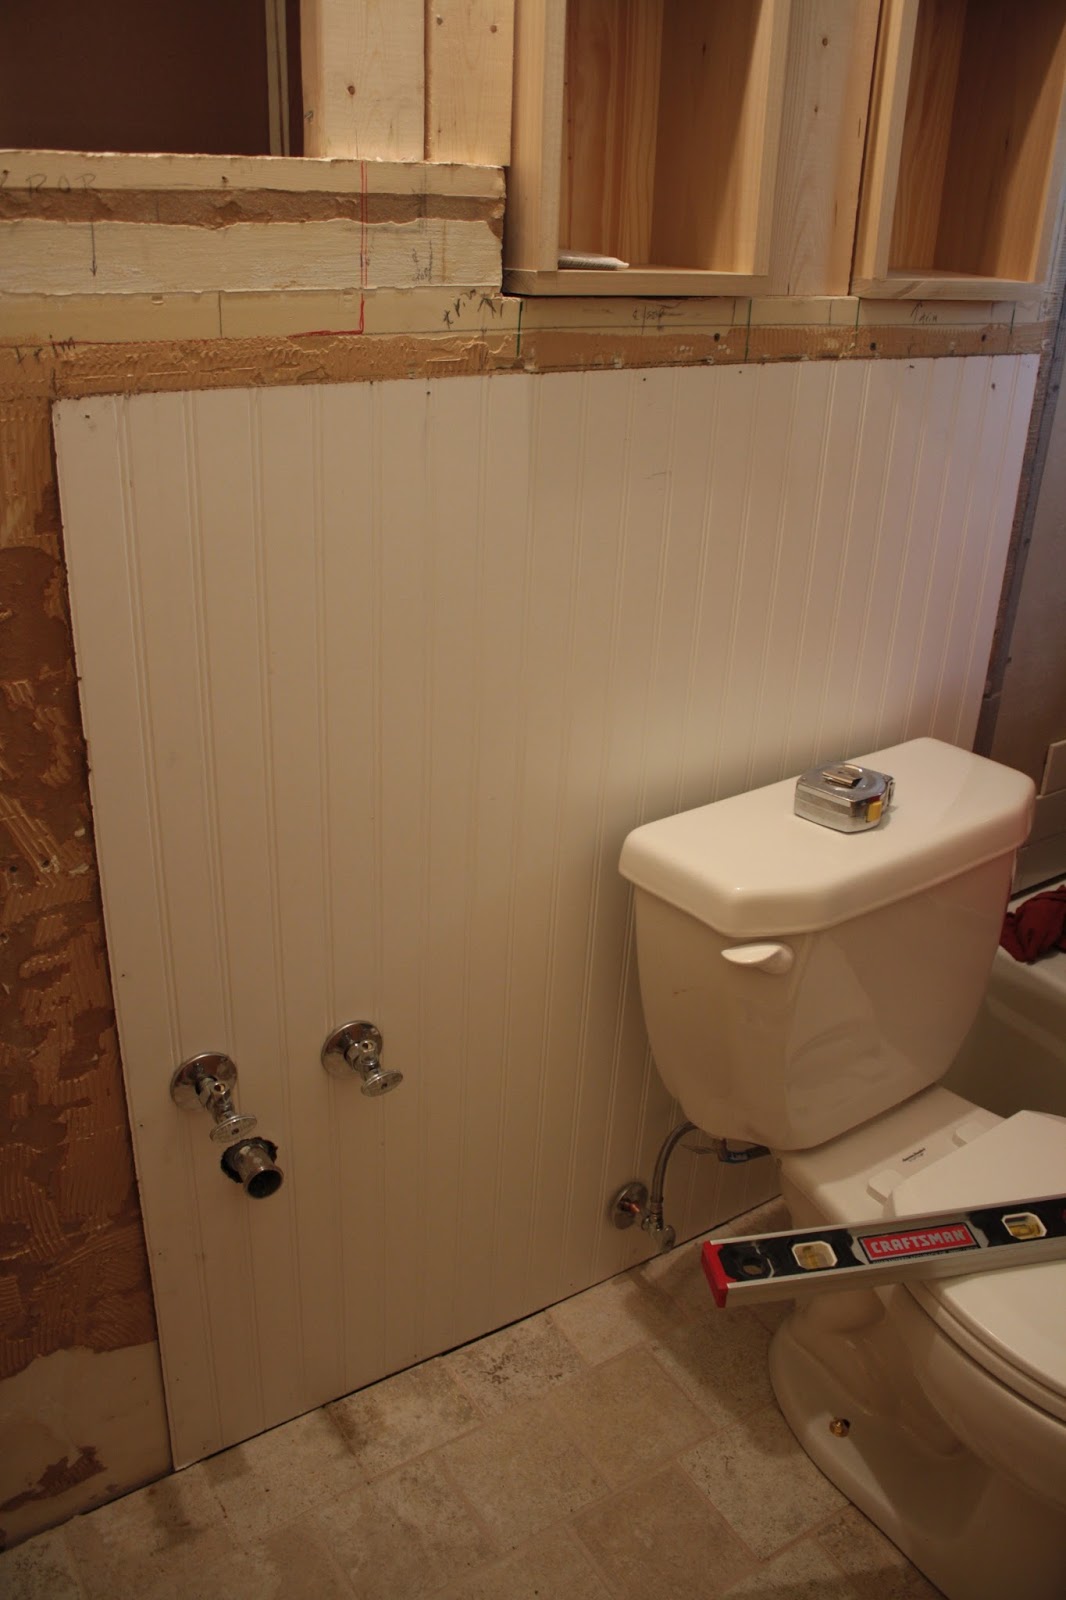 How To Shim A Toilet On Tile